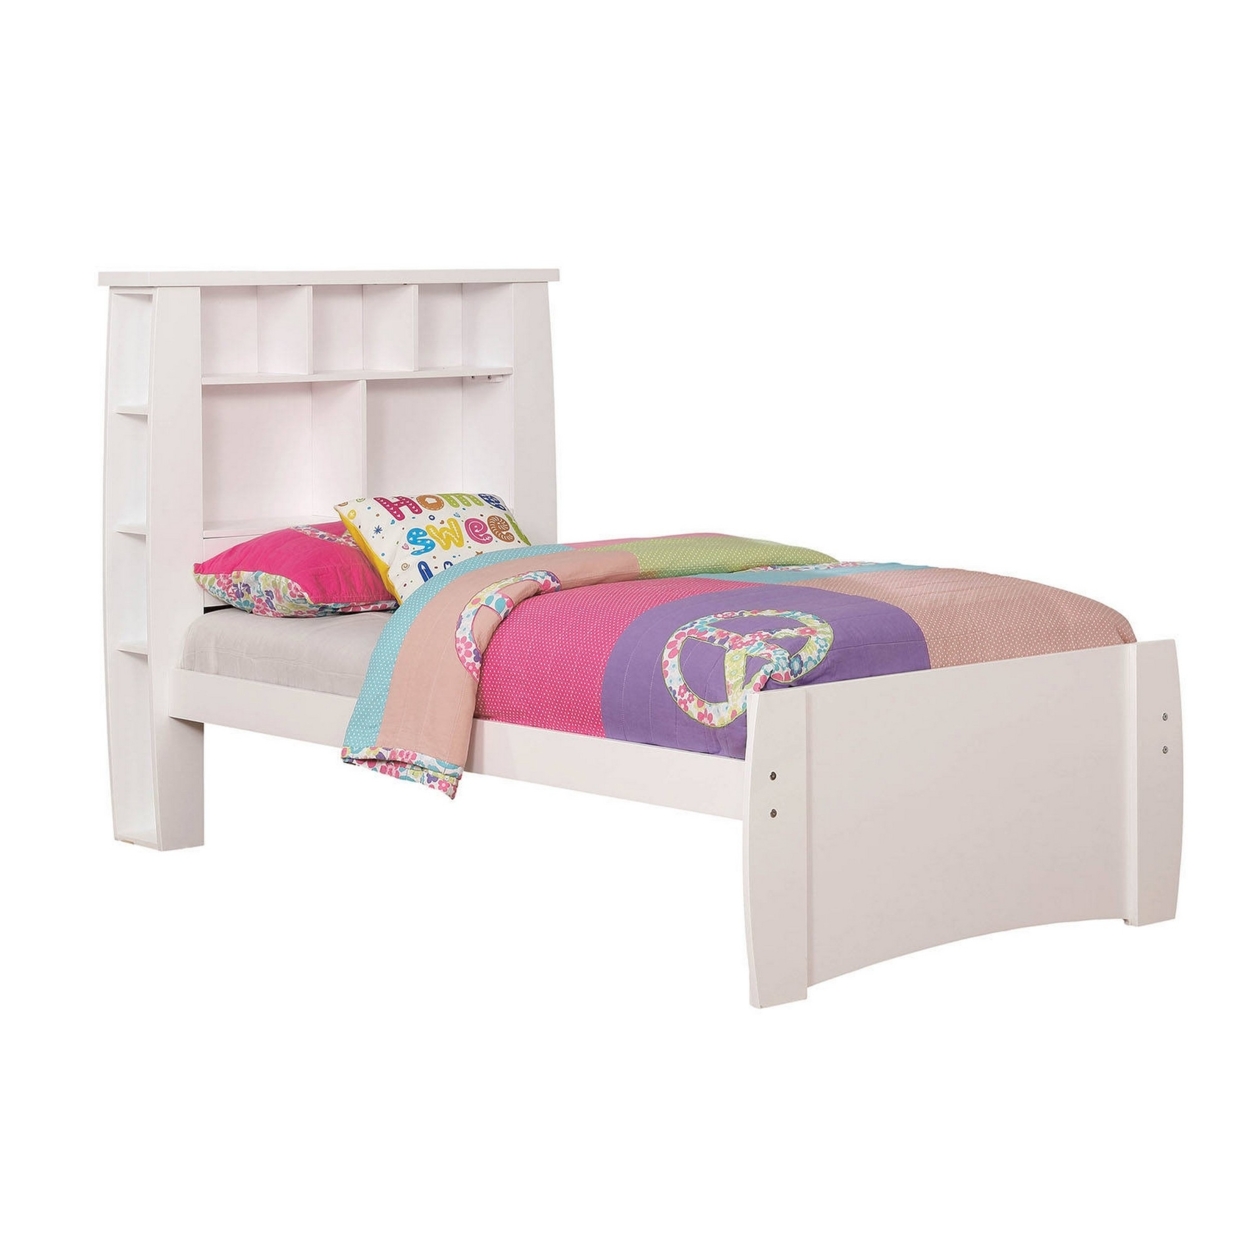 Transitional Twin Size Wooden Storage Bed With Bookcase Headboard, White- Saltoro Sherpi